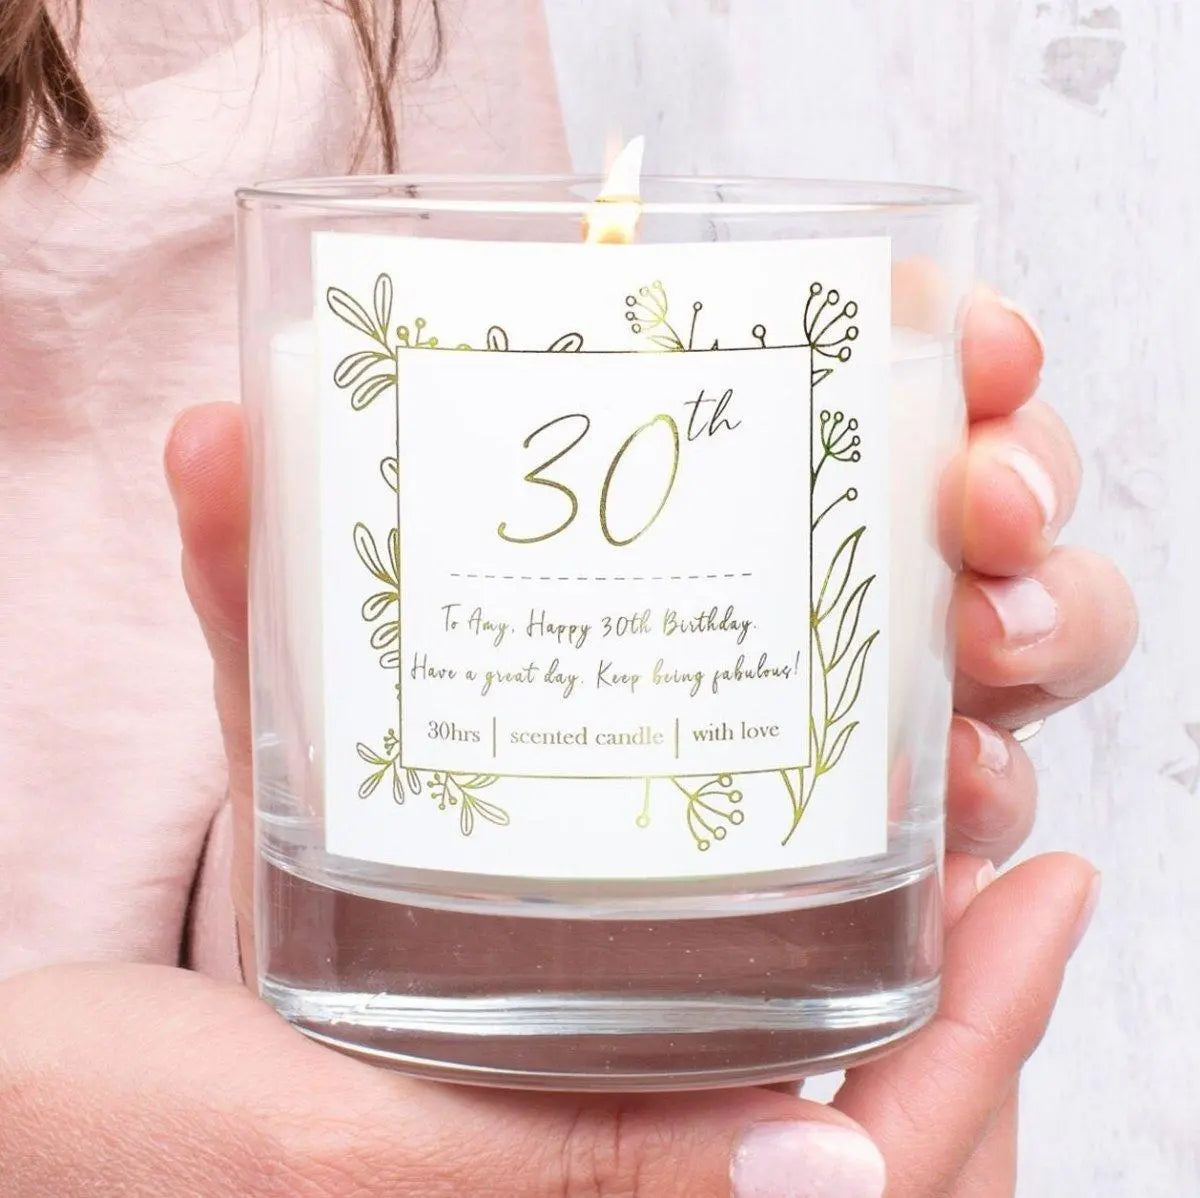 Personalised 30th Birthday Candle, Personalized Birthday Candle Gift, 30th Birthday Gift, Birthday Present, For Her, Birthday Any Age Gift - Amy Lucy